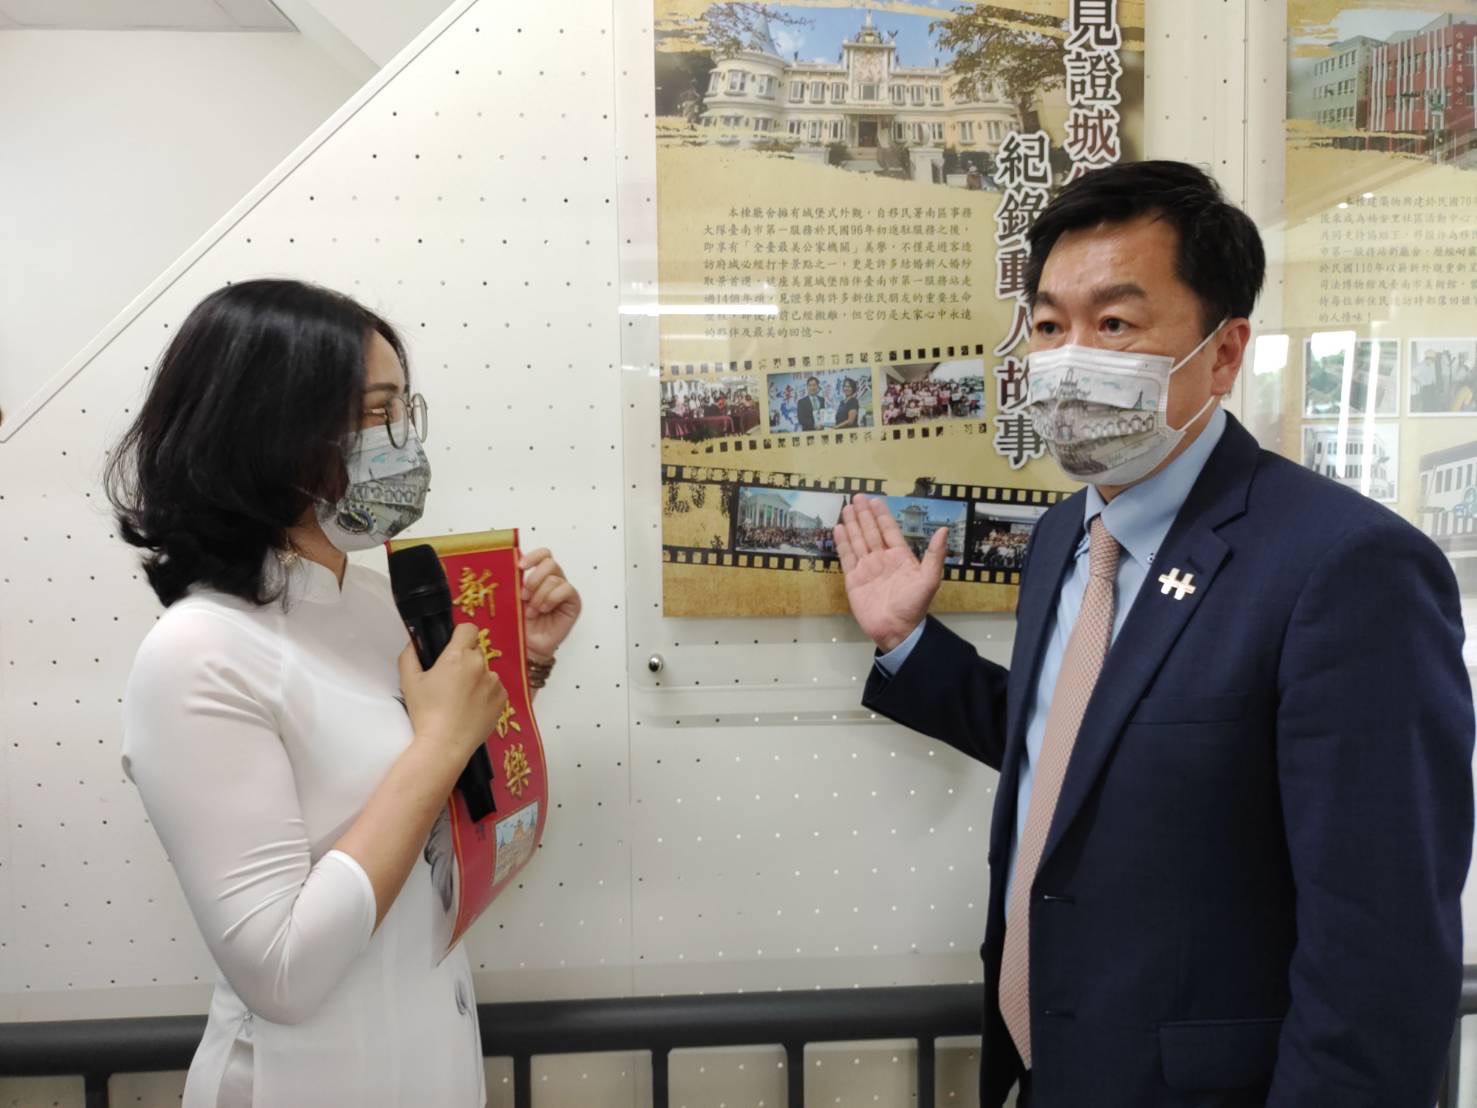 The Political Deputy Minister Chen Zong Yan (陳宗彥) attended the opening ceremony (Photo / Provided by the National Immigration Agency, Tainan City First Service Center)